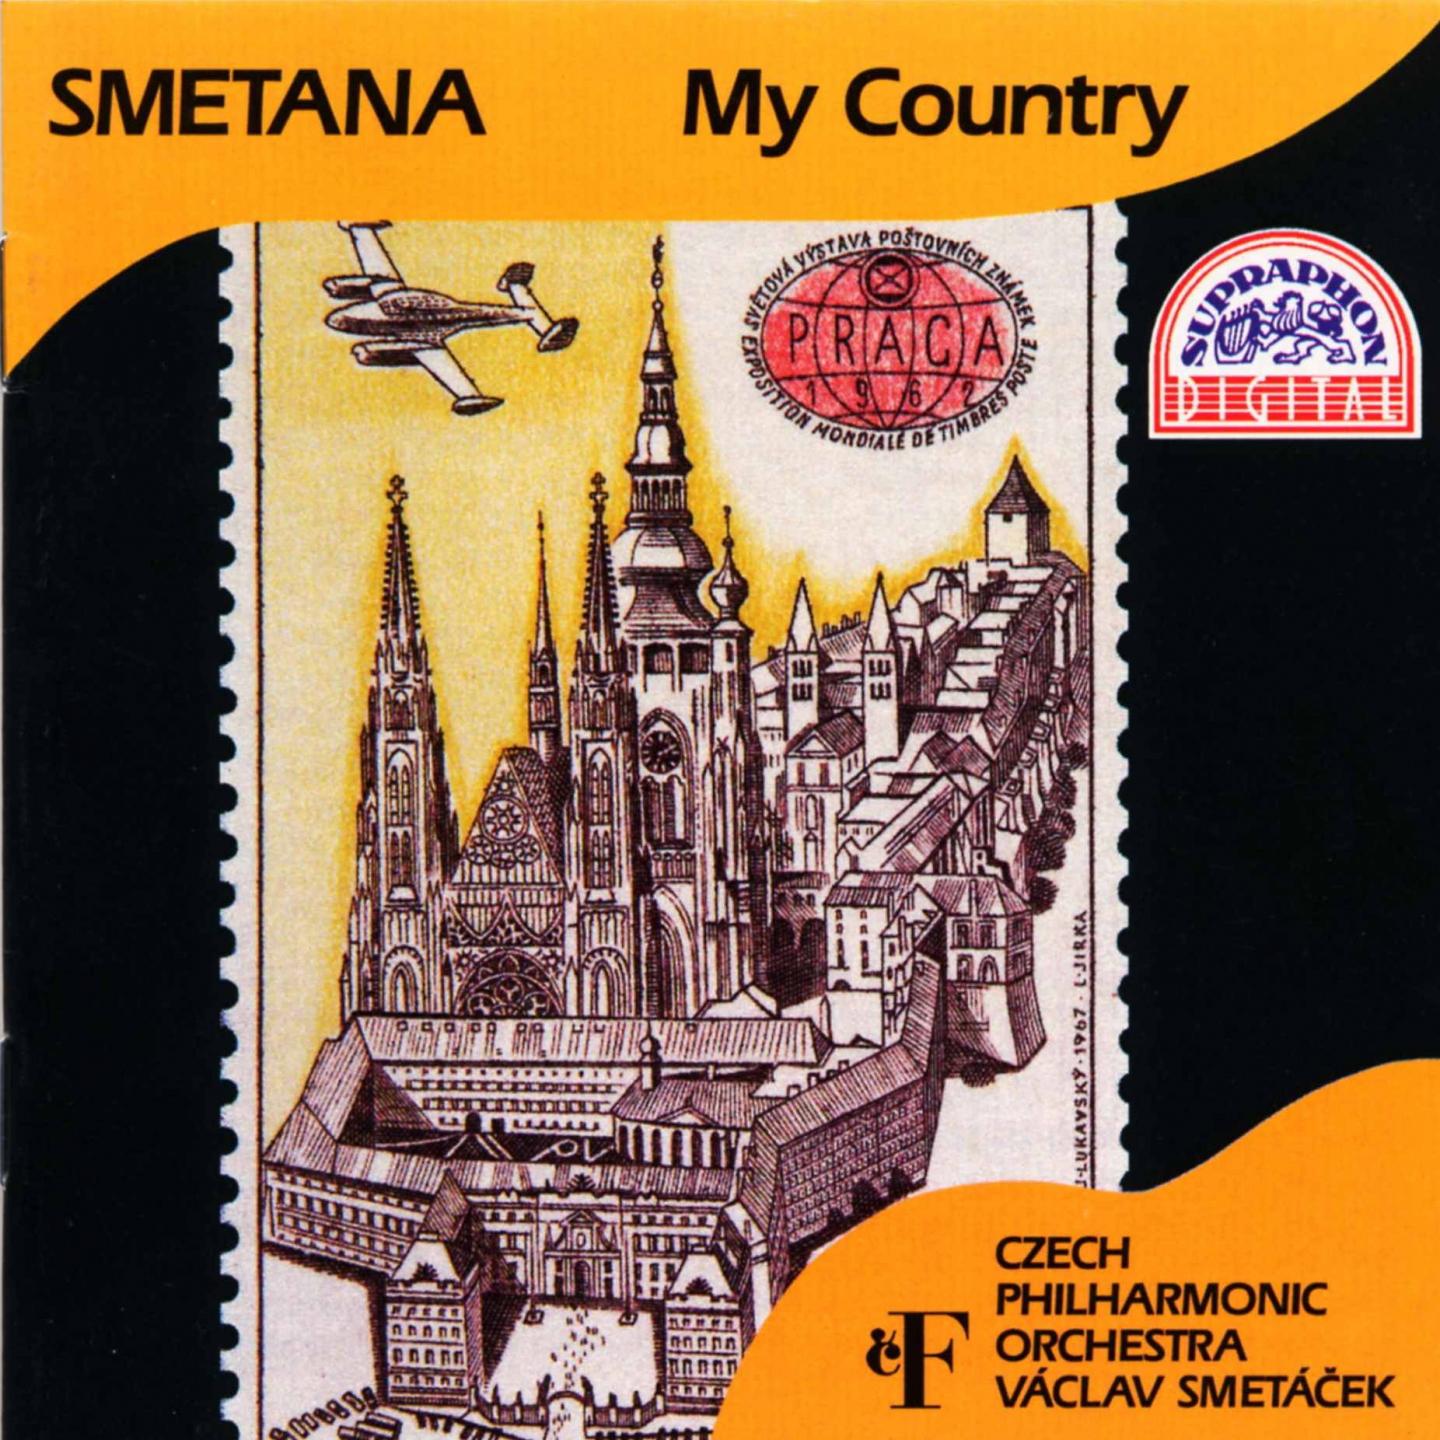 Smetana: My Country. A Cycle of Symphonic Poems